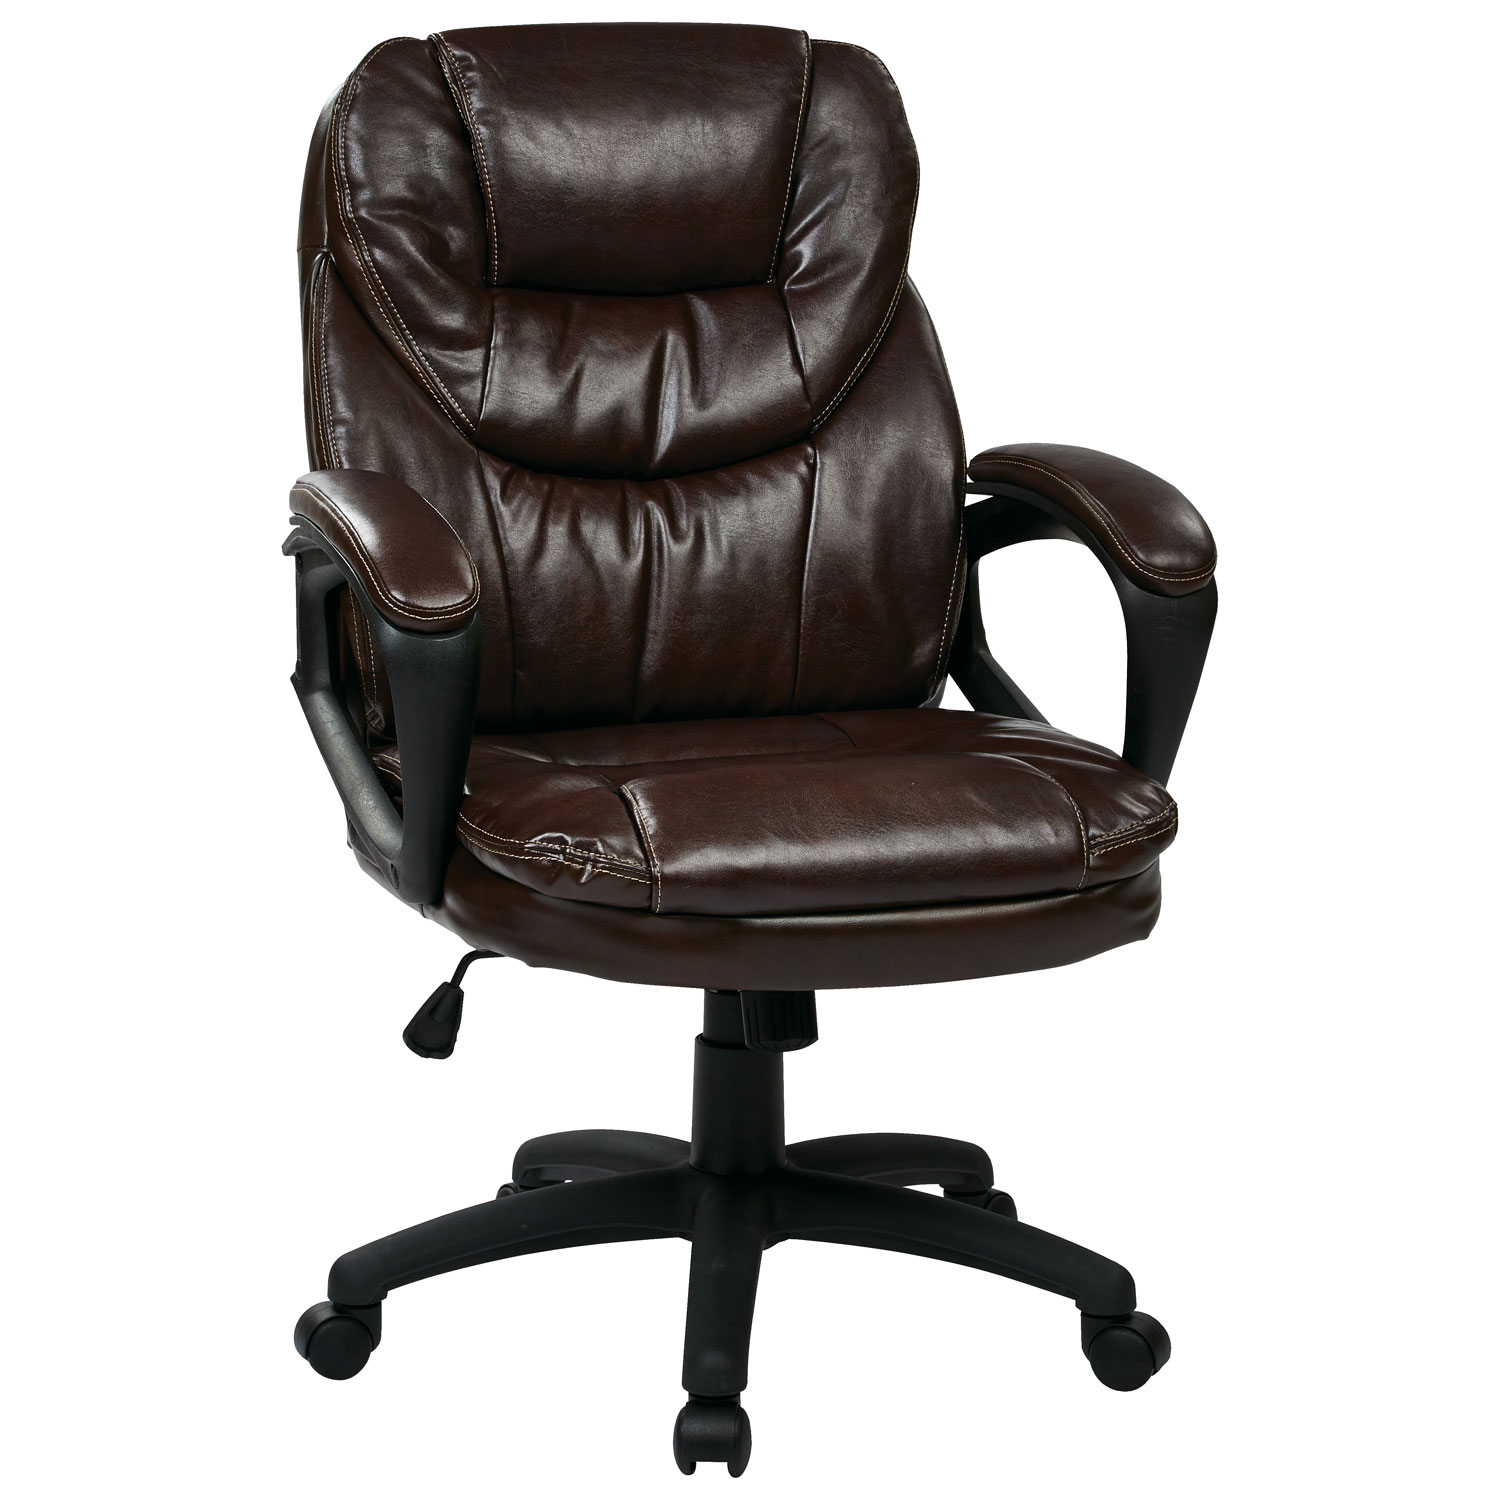 Office Star WorkSmart Faux Leather Manager Chair - Chocolate